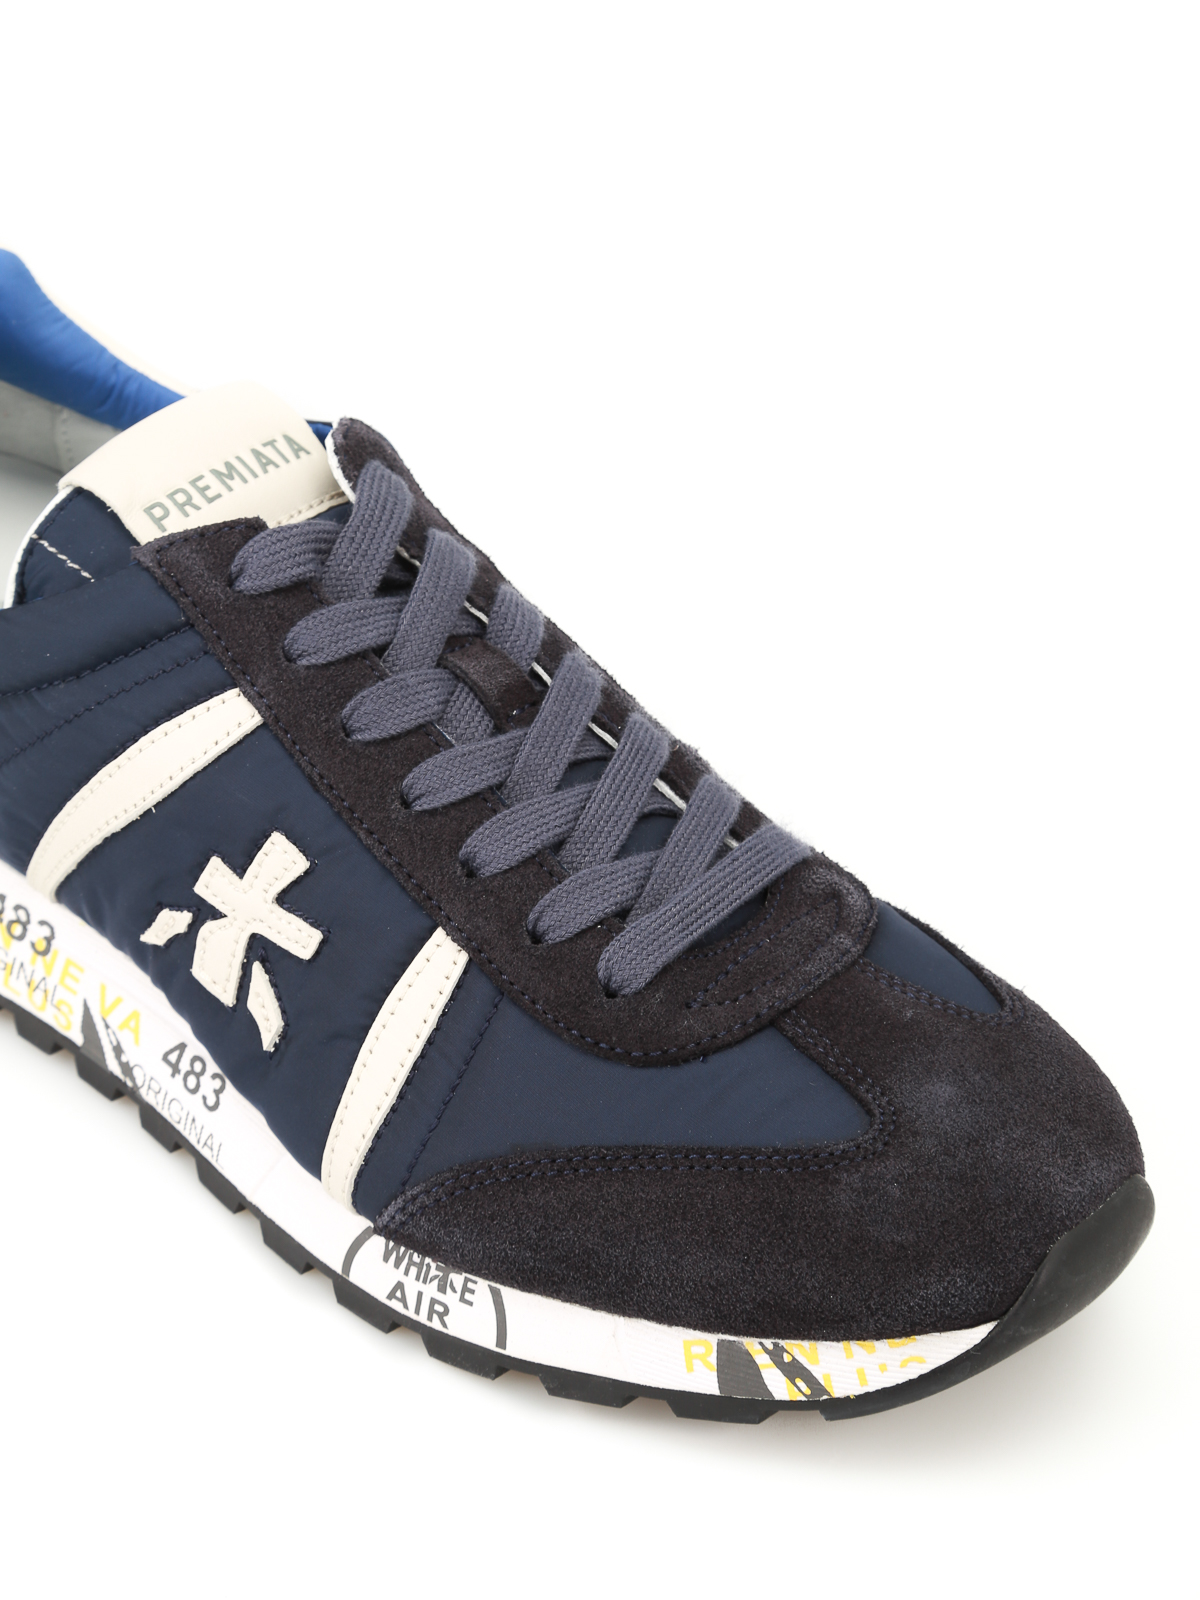 Premiata - Lucy blue sneakers - trainers - LUCY2808 | Shop online at iKRIX